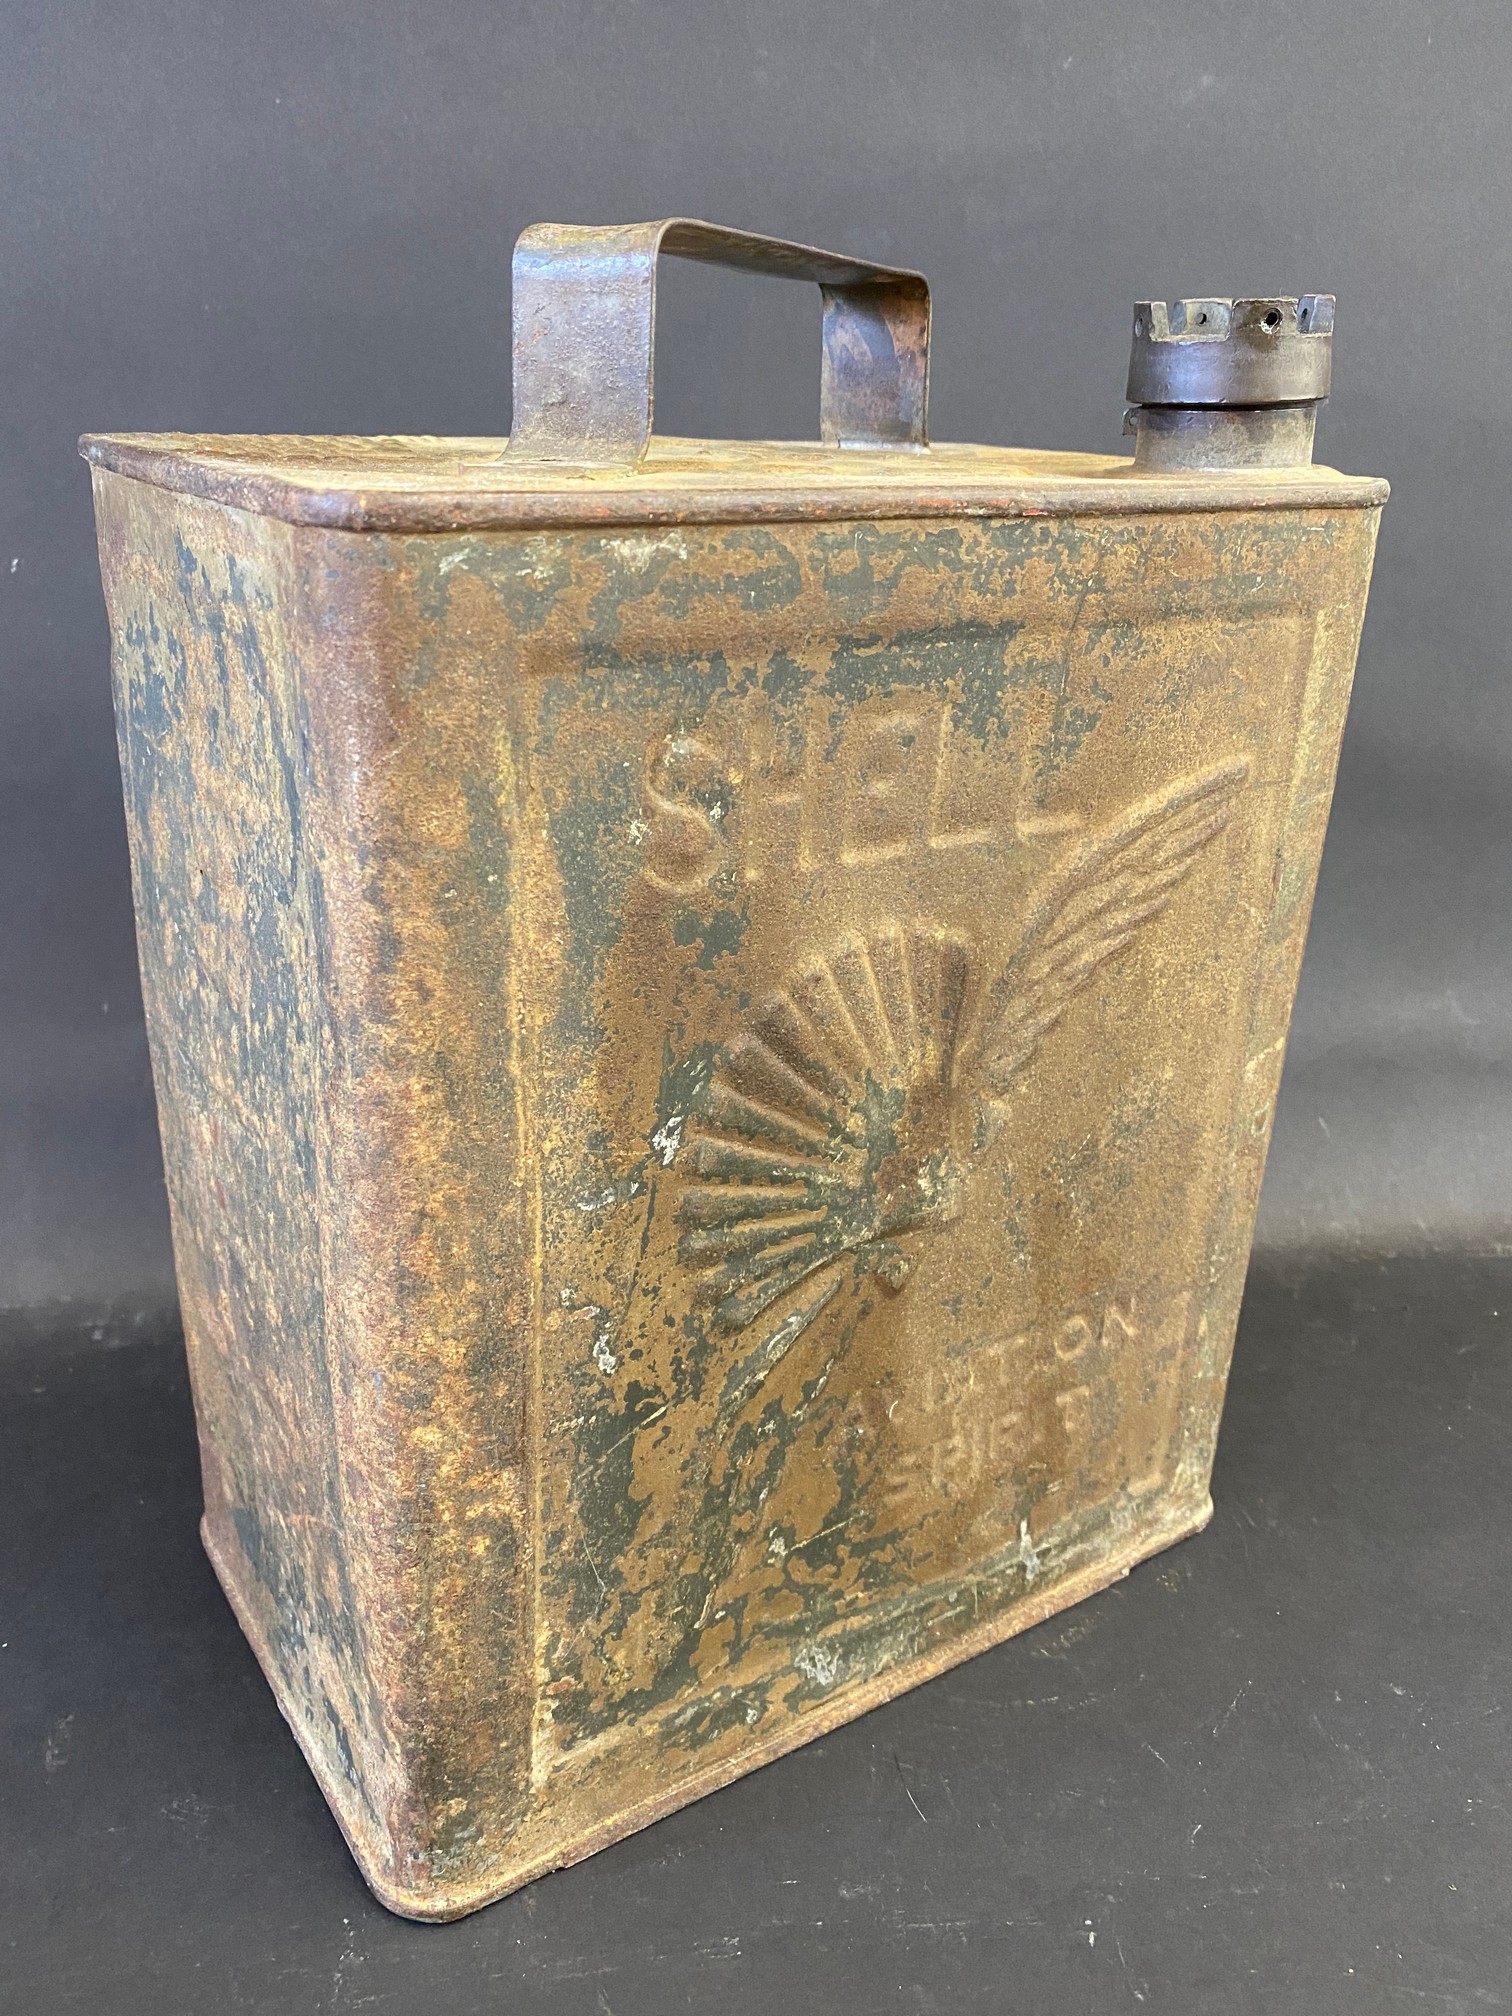 A Shell Aviation Spirit two gallon petrol can by Valor, dated 1933, in original condition. - Image 2 of 4